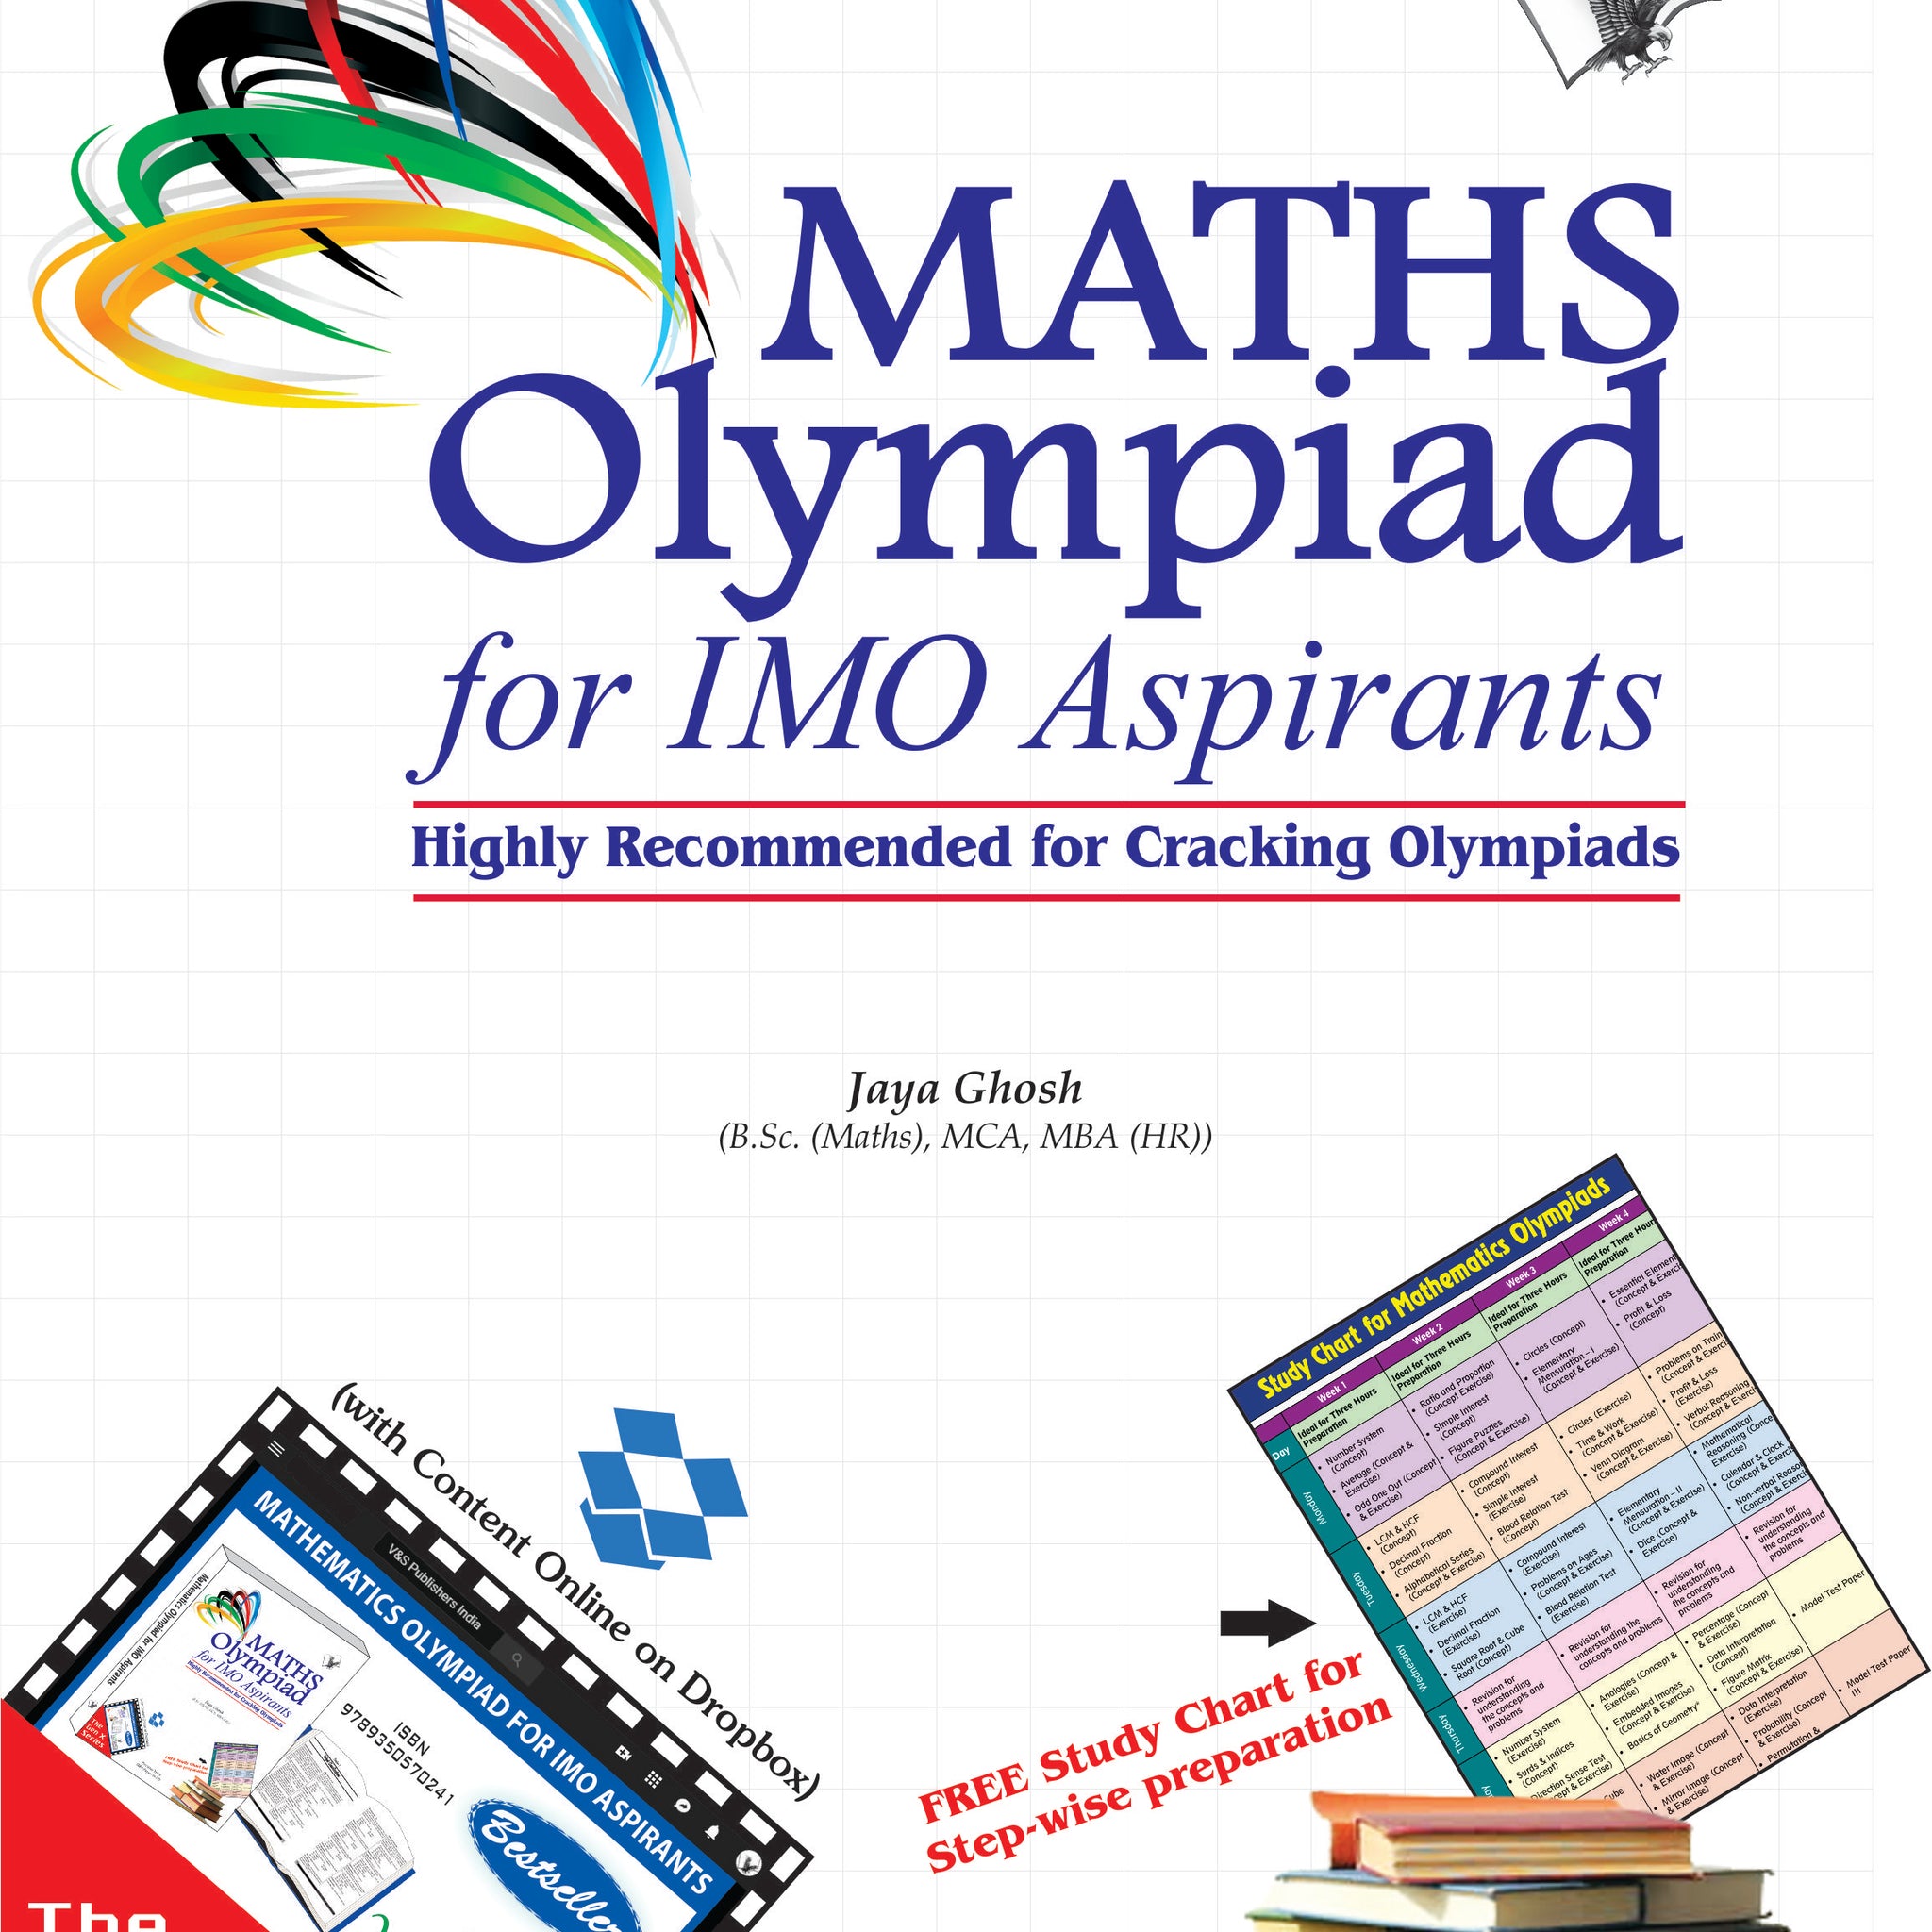 Mathematics Olympiad For Imo Aspirants (With Online Content on Dropbox)